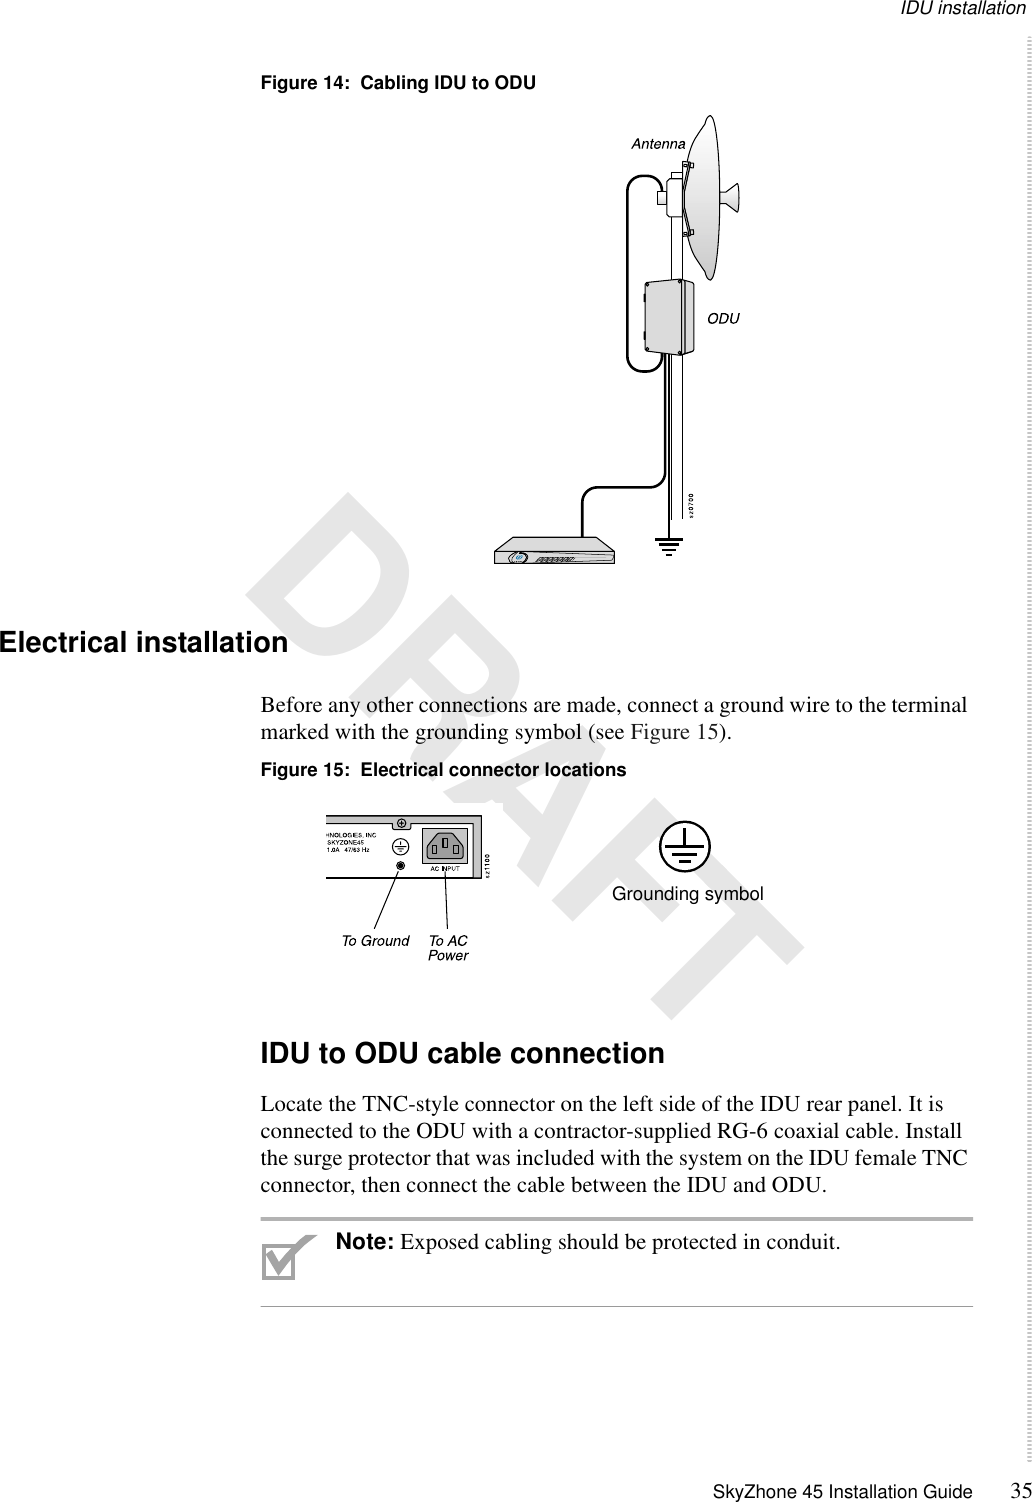 IDU installation SkyZhone 45 Installation Guide 35 DRAFTFigure 14:  Cabling IDU to ODUElectrical installationBefore any other connections are made, connect a ground wire to the terminal marked with the grounding symbol (see Figure 15). Figure 15:  Electrical connector locationsIDU to ODU cable connectionLocate the TNC-style connector on the left side of the IDU rear panel. It is connected to the ODU with a contractor-supplied RG-6 coaxial cable. Install the surge protector that was included with the system on the IDU female TNC connector, then connect the cable between the IDU and ODU.Note: Exposed cabling should be protected in conduit.Grounding symbol